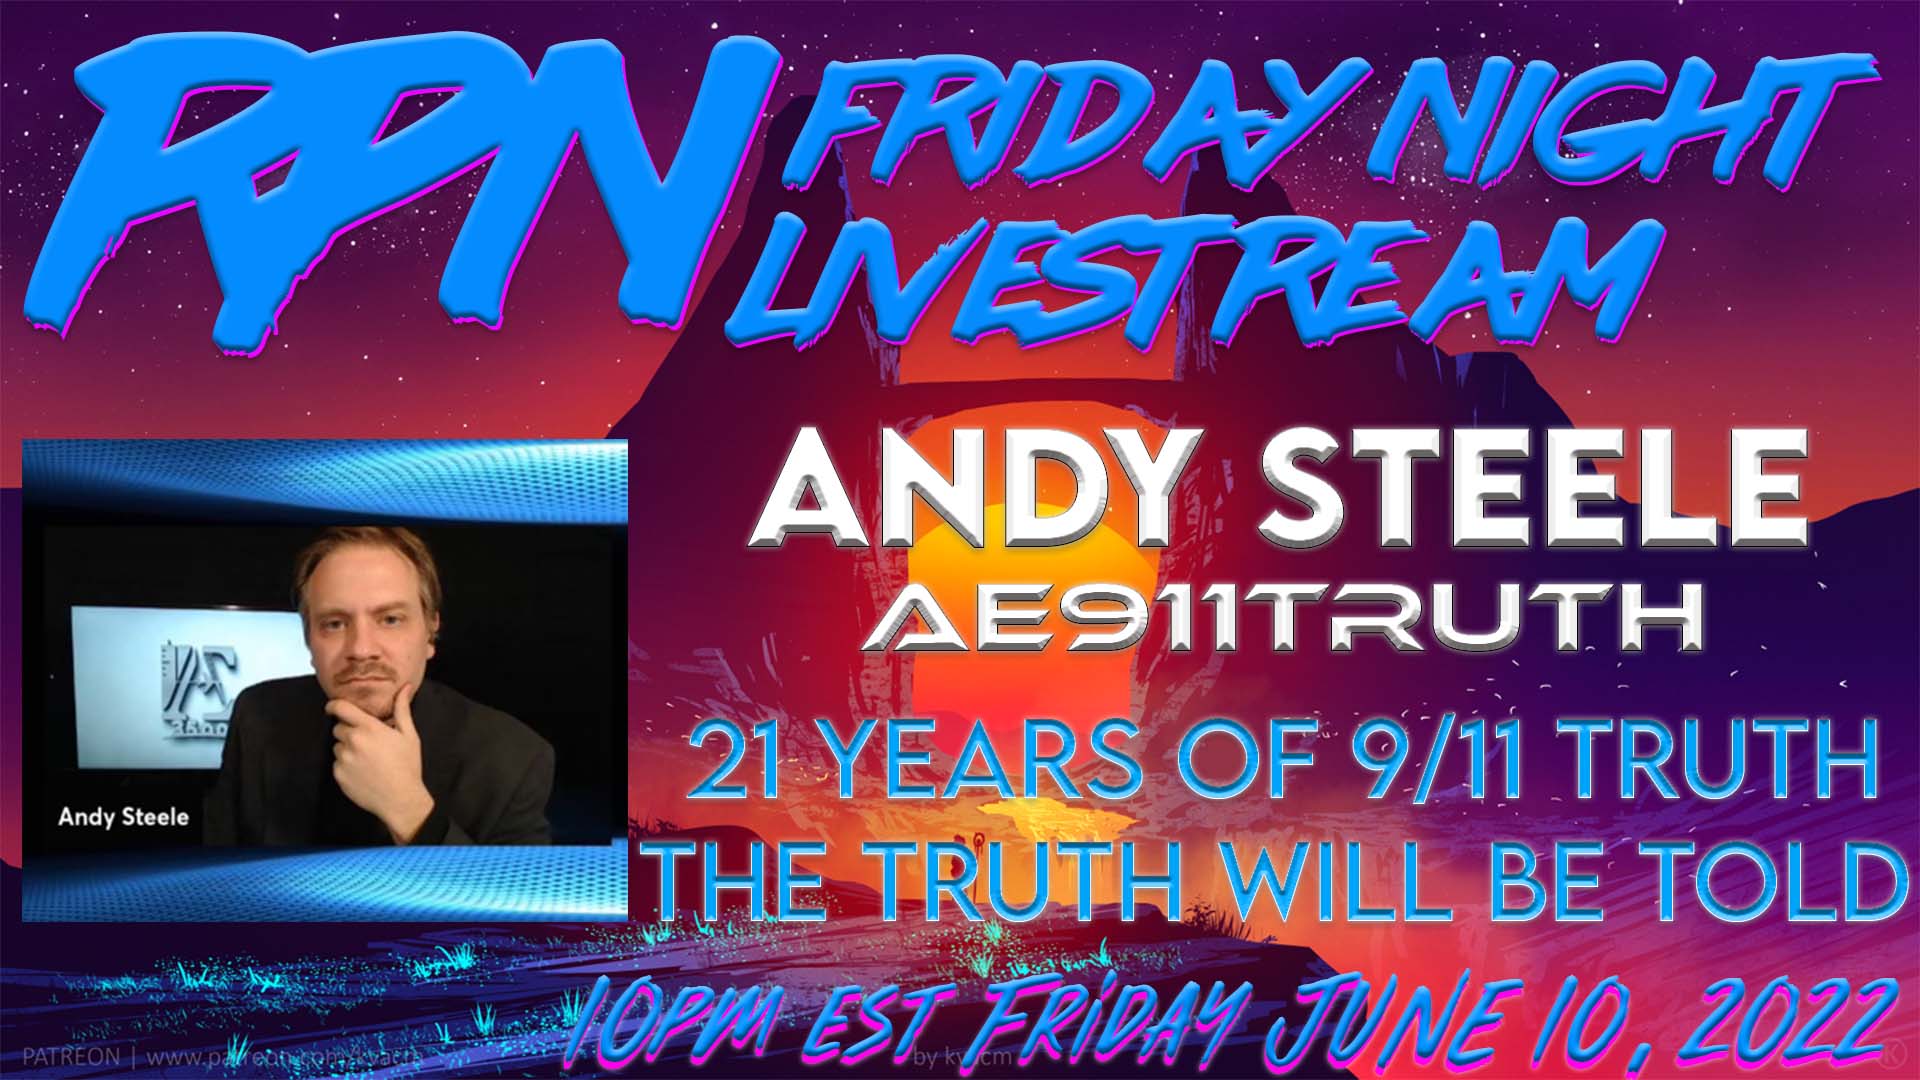 9/11 21 Years Later with Andy Steele & AE911Truth on Fri. Night Livestream